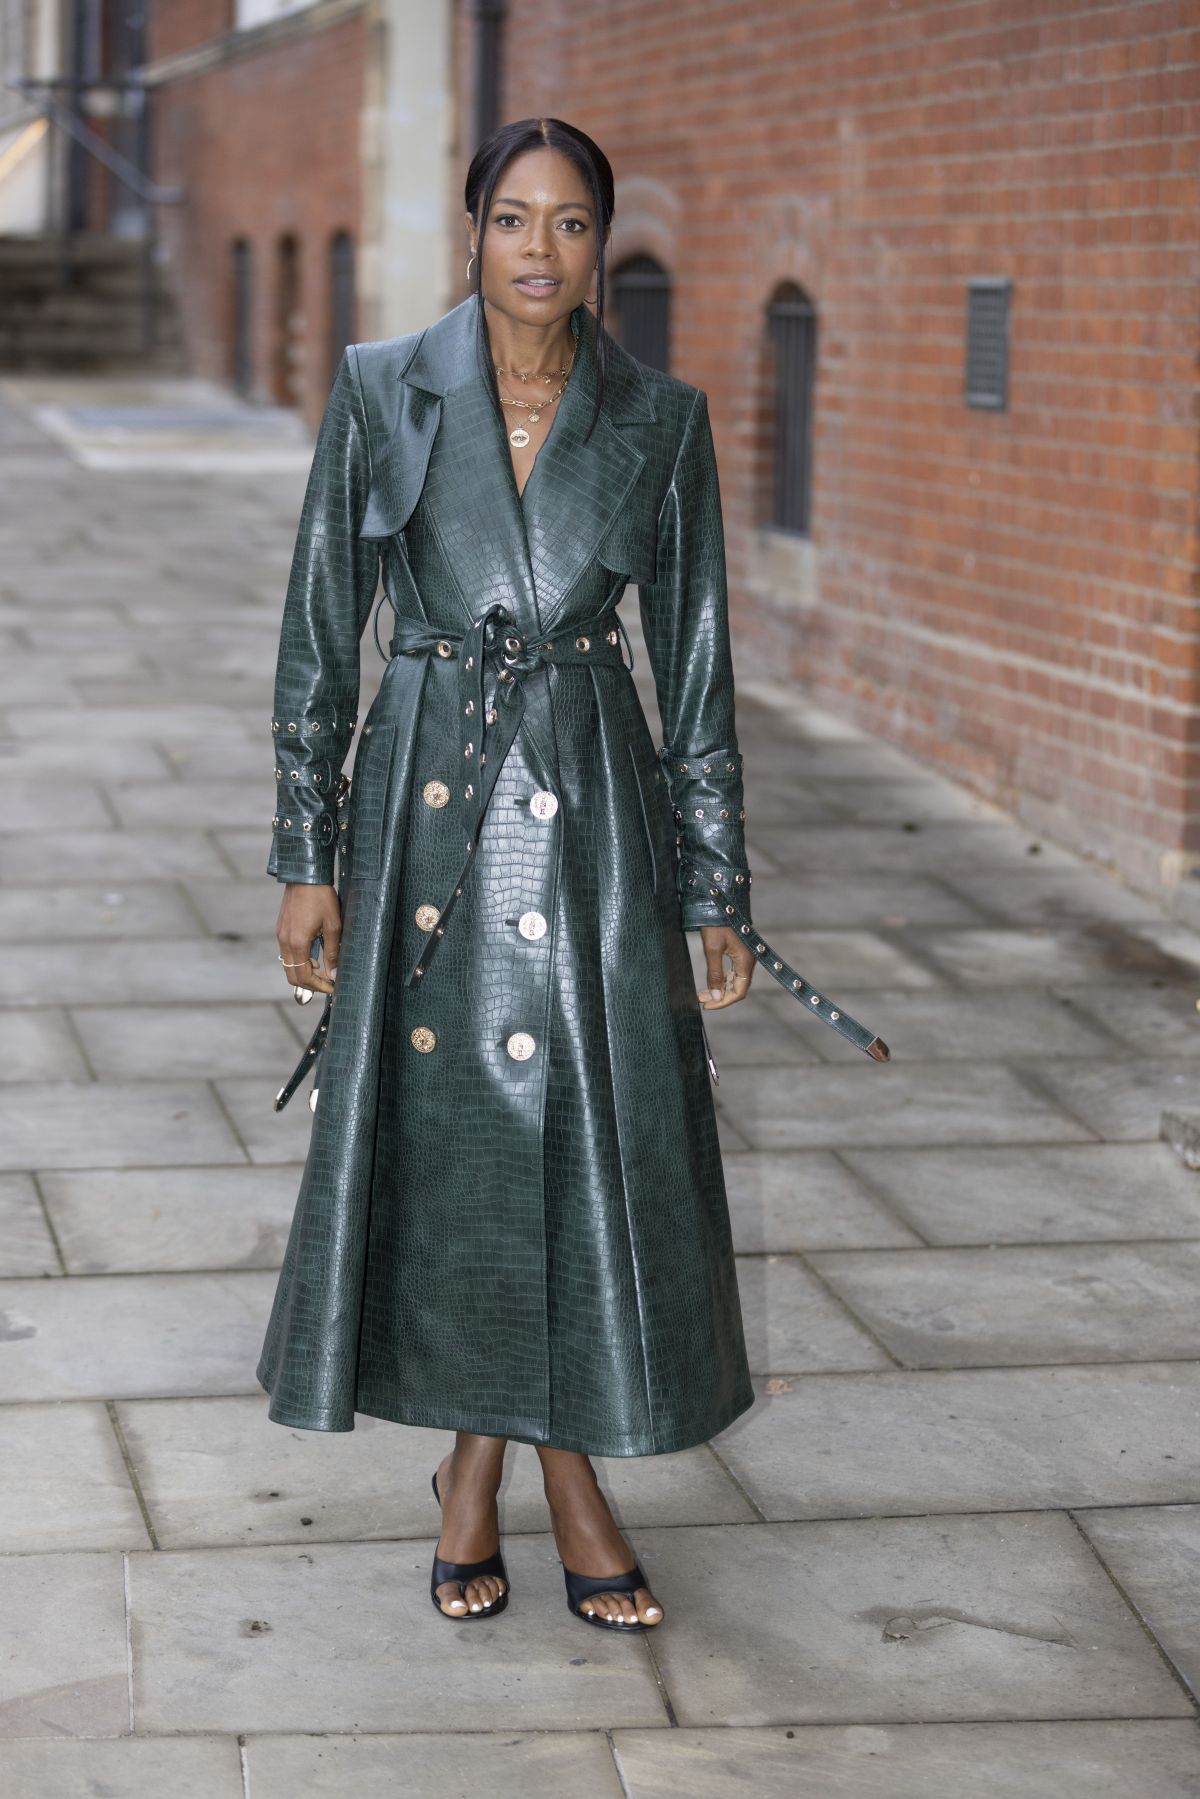 Naomie Harris Arrives at Mithridate Pre-LFW Fashion Show in London 1